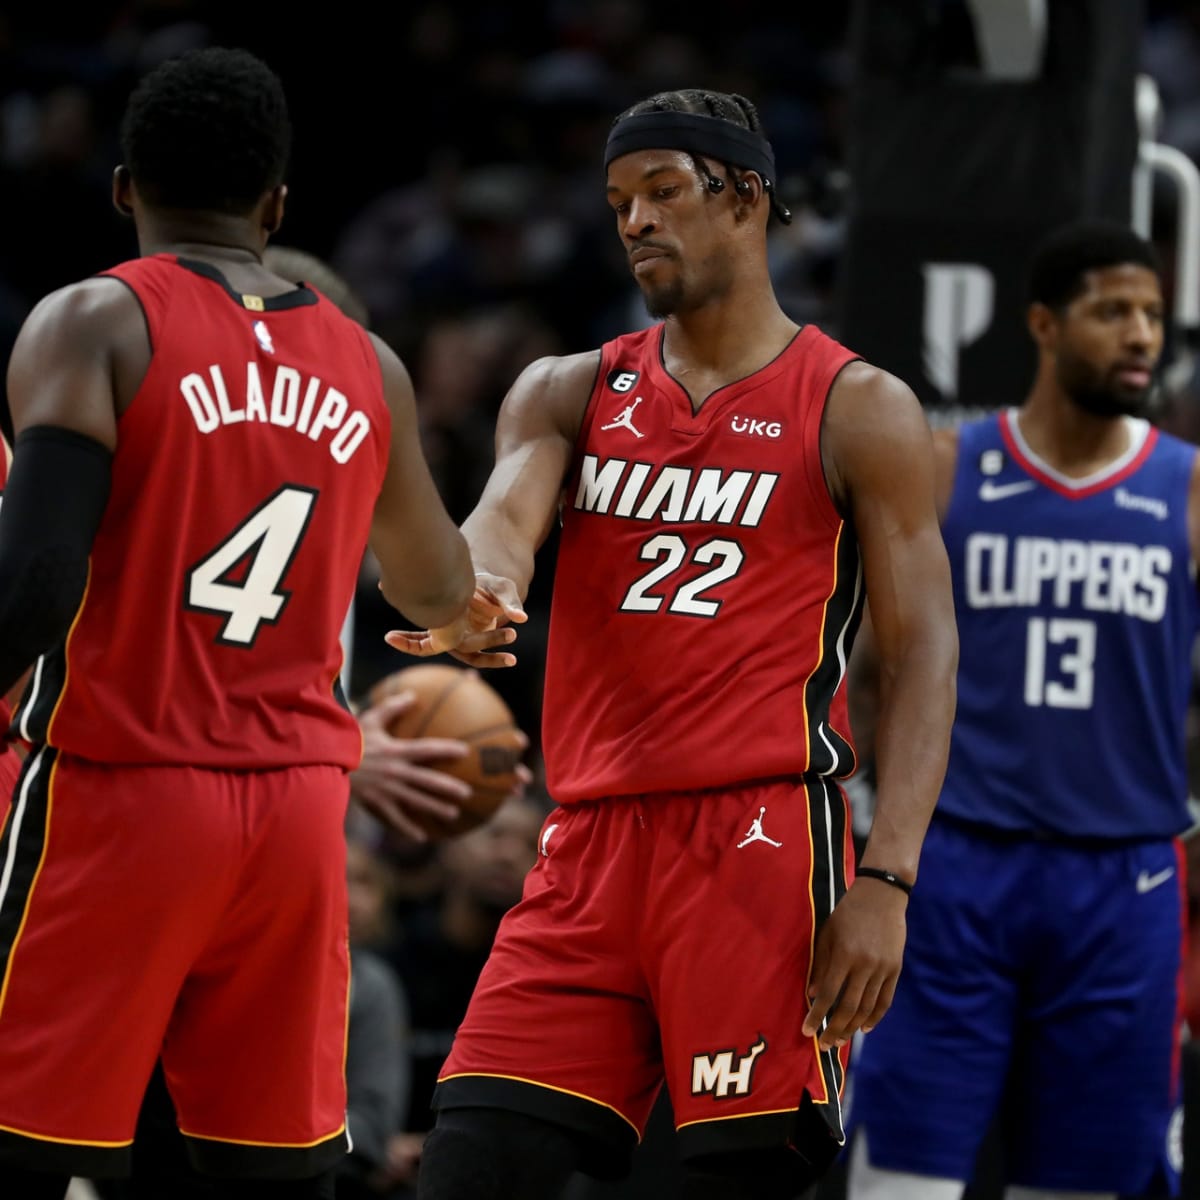 Miami Heat wear shirts inside out to support LA Clippers